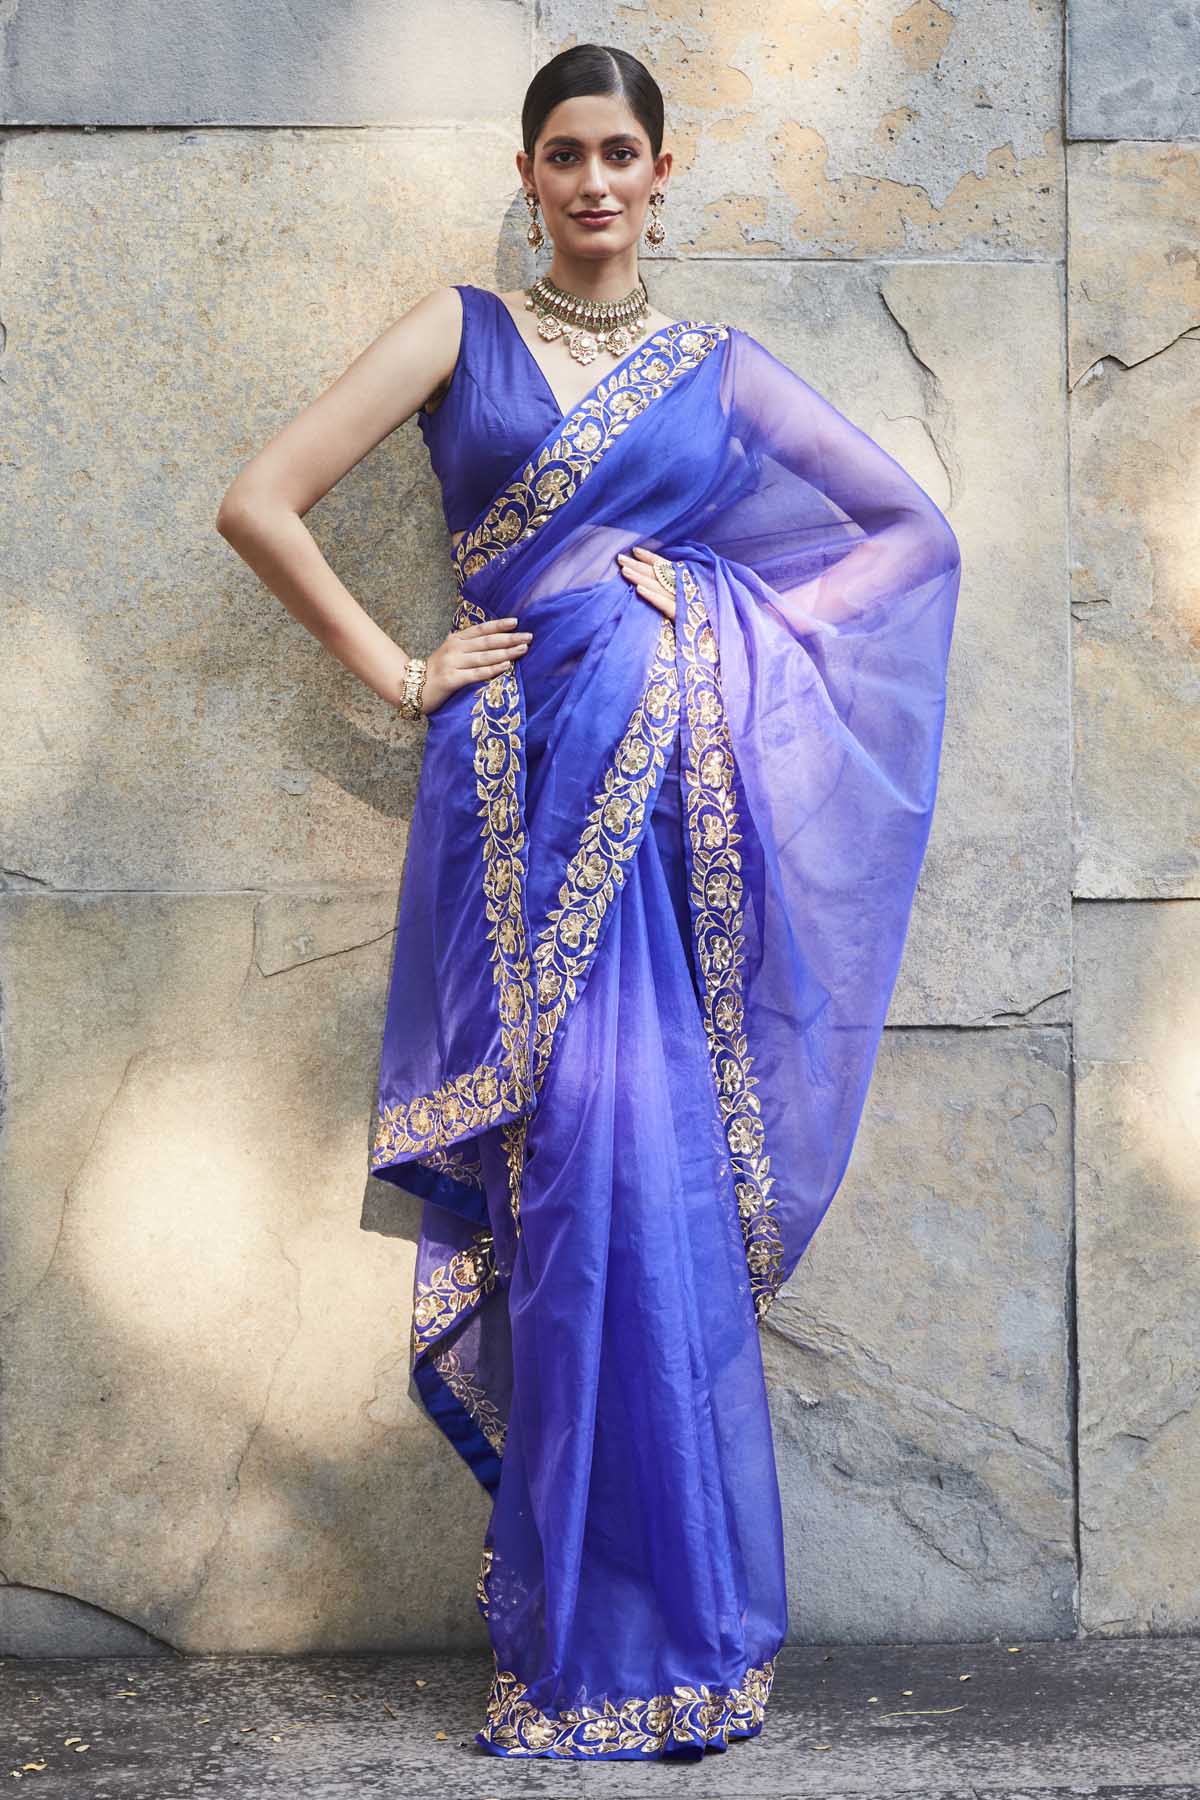 Designer Ranian Purple silk organza saree with delicate floral pattern border in 3D sequins and zari. The saree comes with a plain satin silk blouse with a back hook For women Online at ScrollnShops